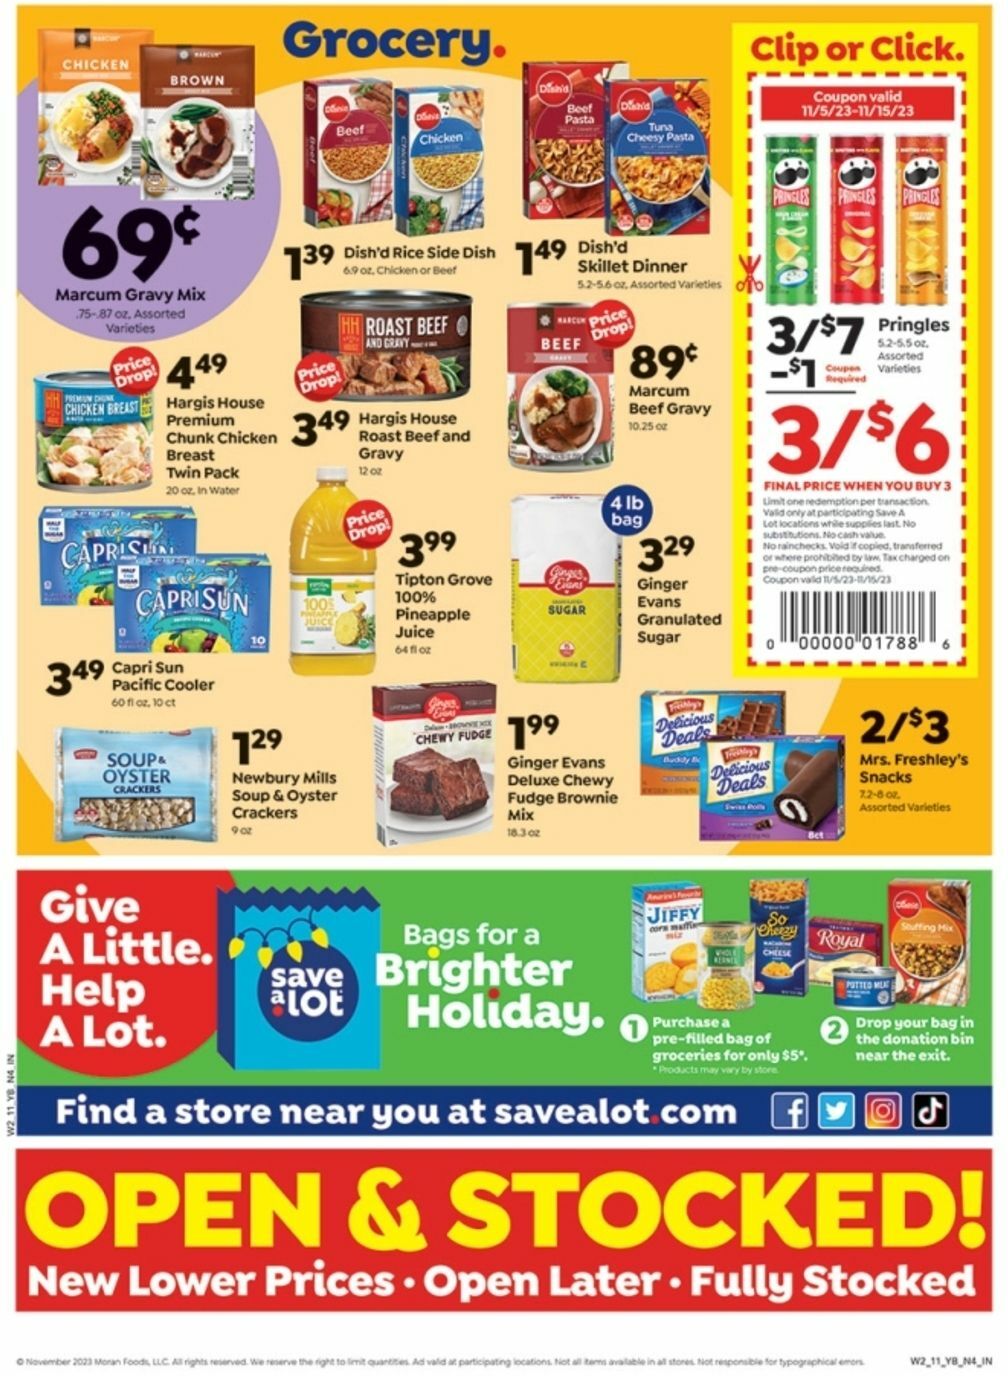 Save A Lot Weekly Ad from November 8